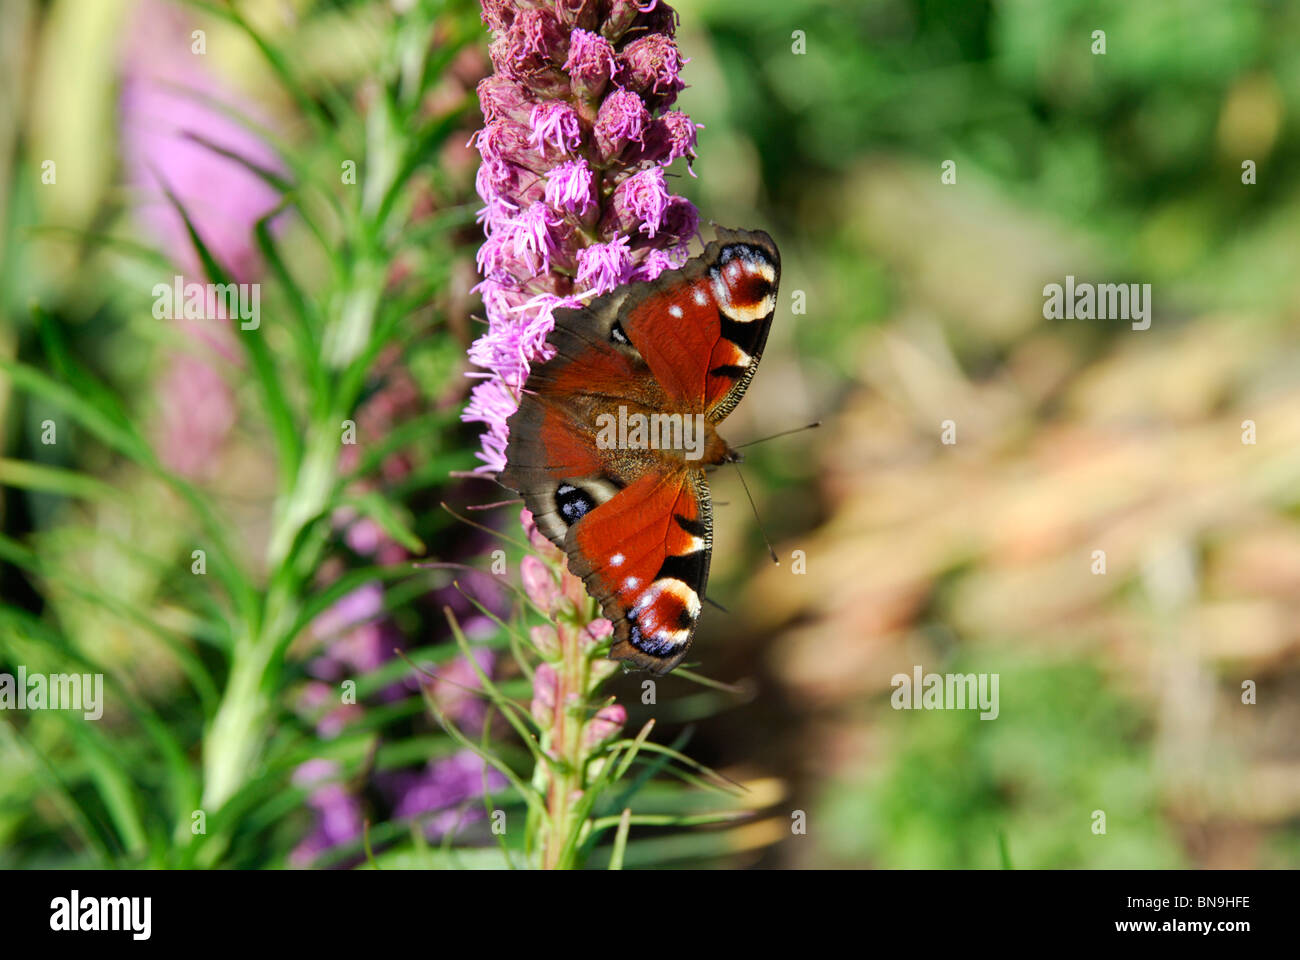 Peacock Butterfly Feeding on Foxtail Lily Stock Photo